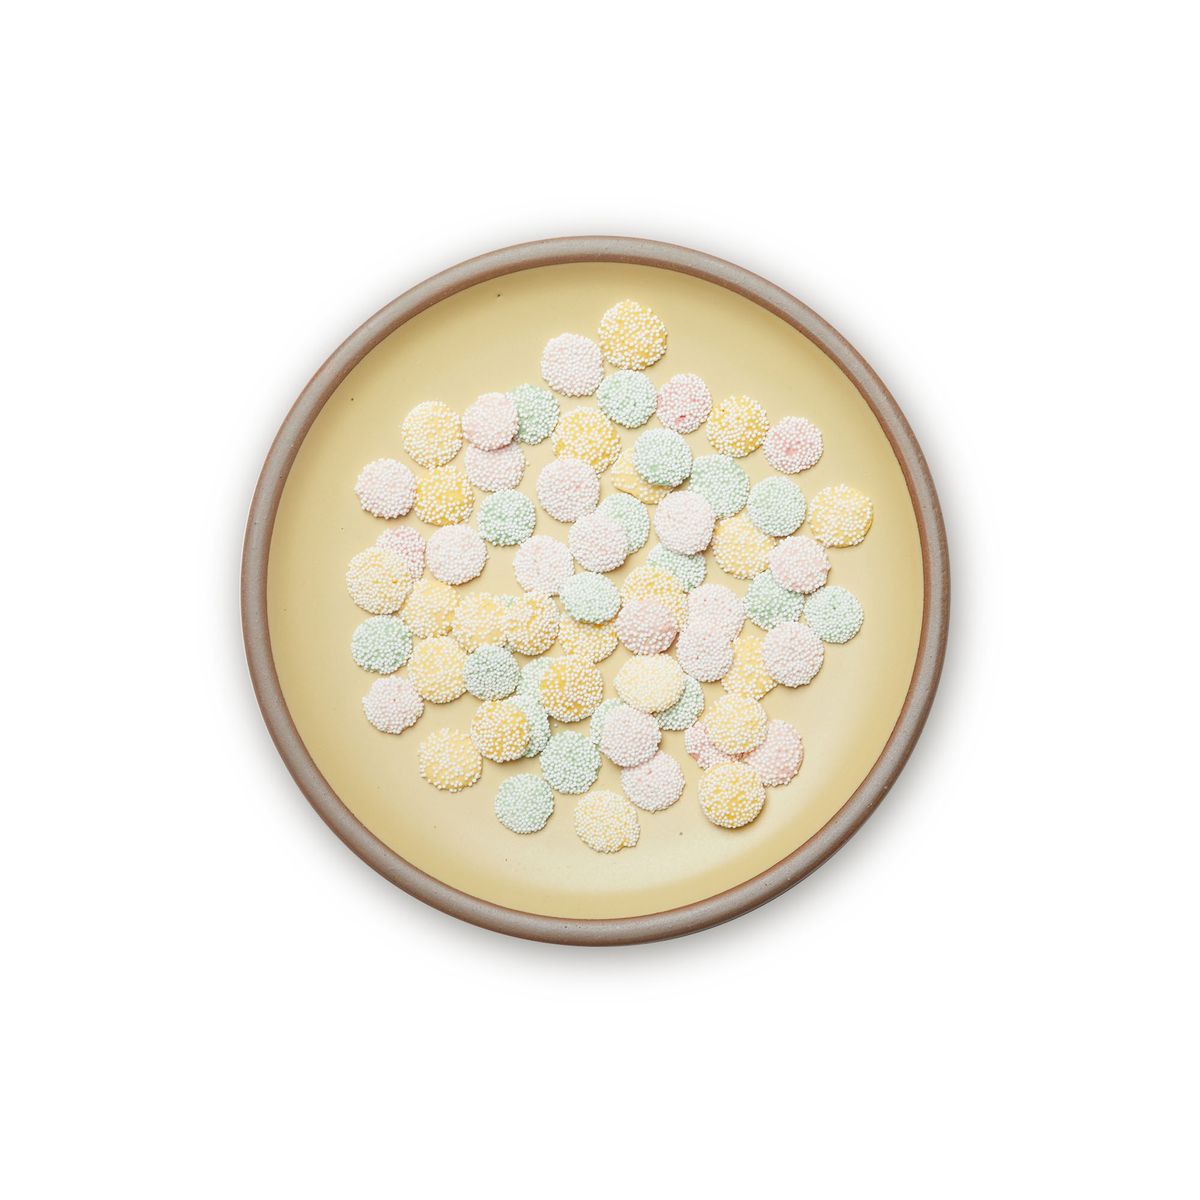 Little pastel candies on a dinner sized ceramic plate in a light butter yellow color featuring iron speckles and an unglazed rim